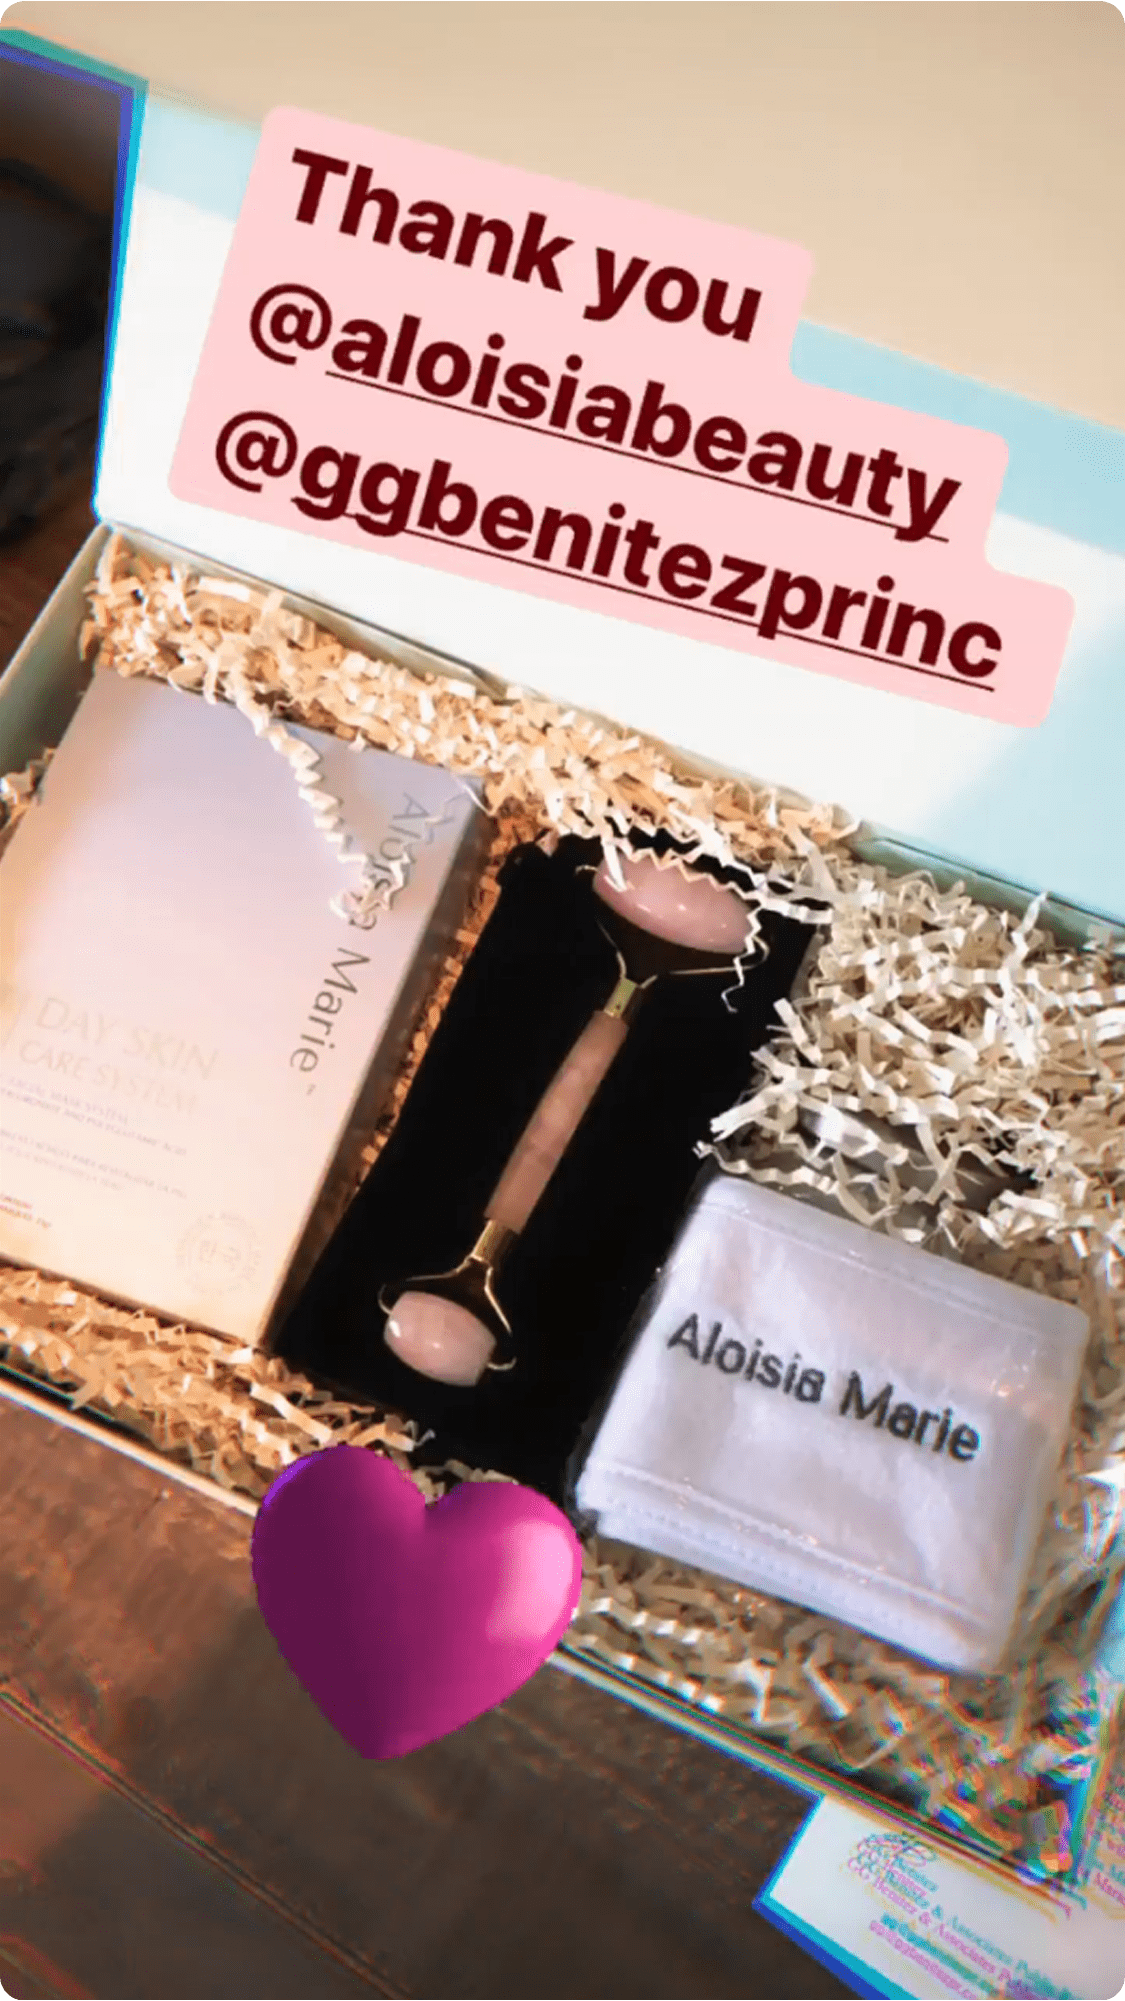 Adriana Lima Mentioning Aloisia Beauty and GG Benitez in her instagram Stories